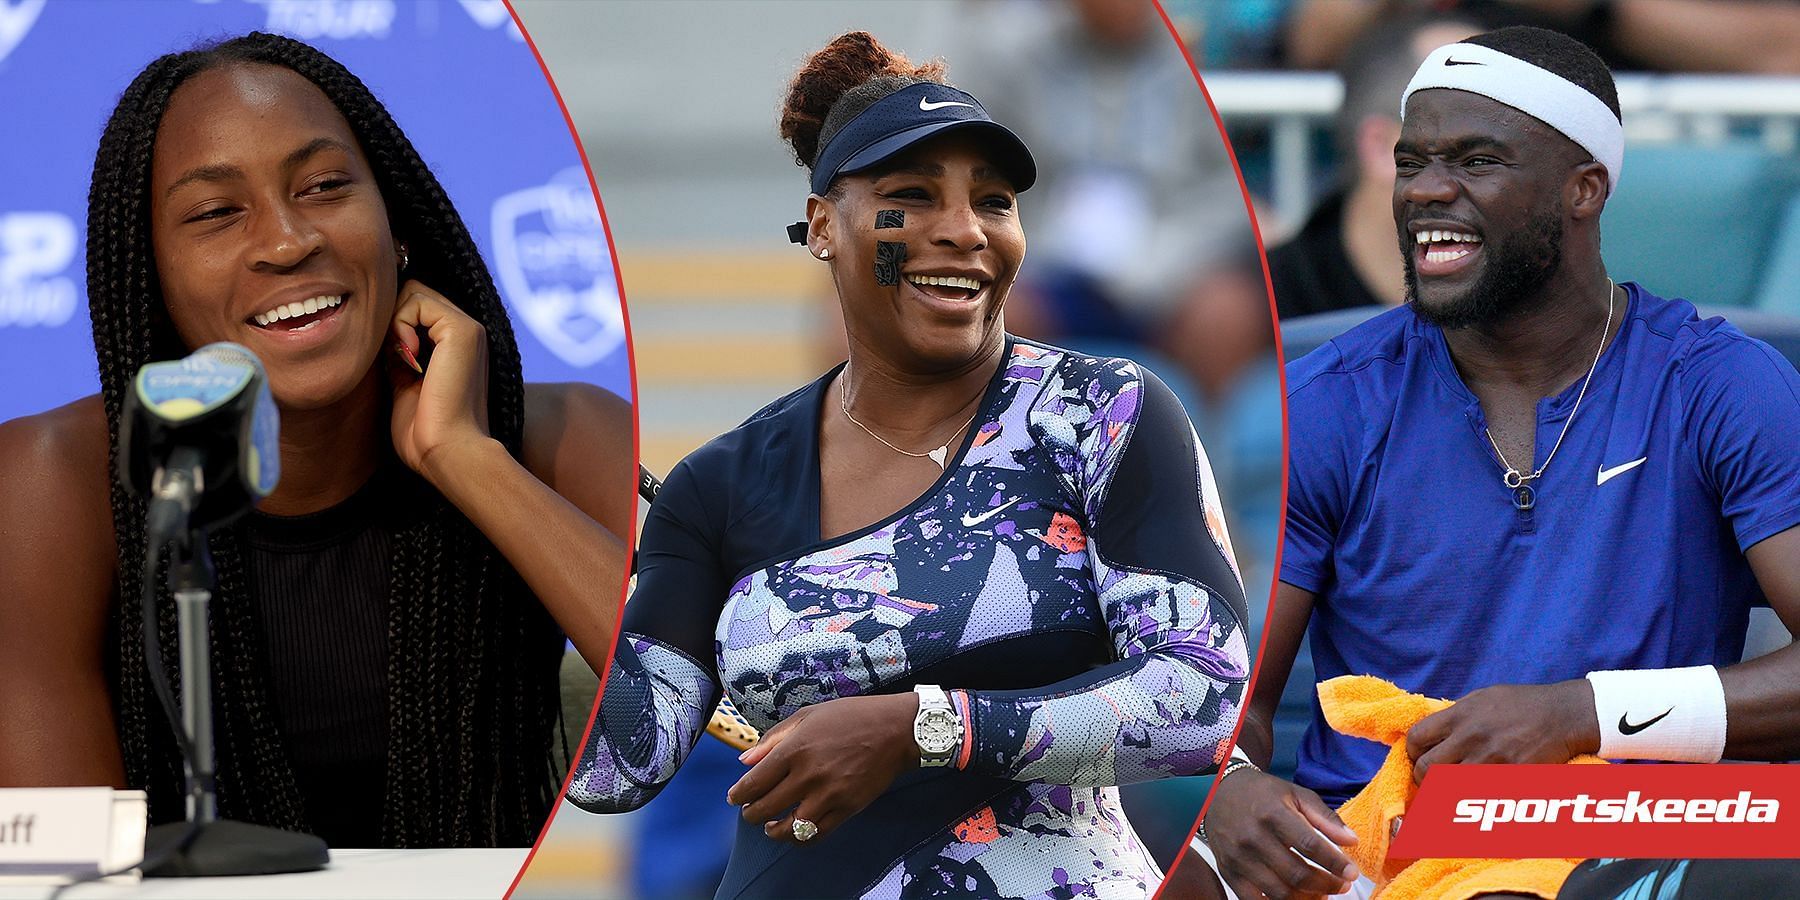 Who is the better Serena Williams (center) fan? Coco Gauff (left) and Frances Tiafoe (right) take on the ATP Tour